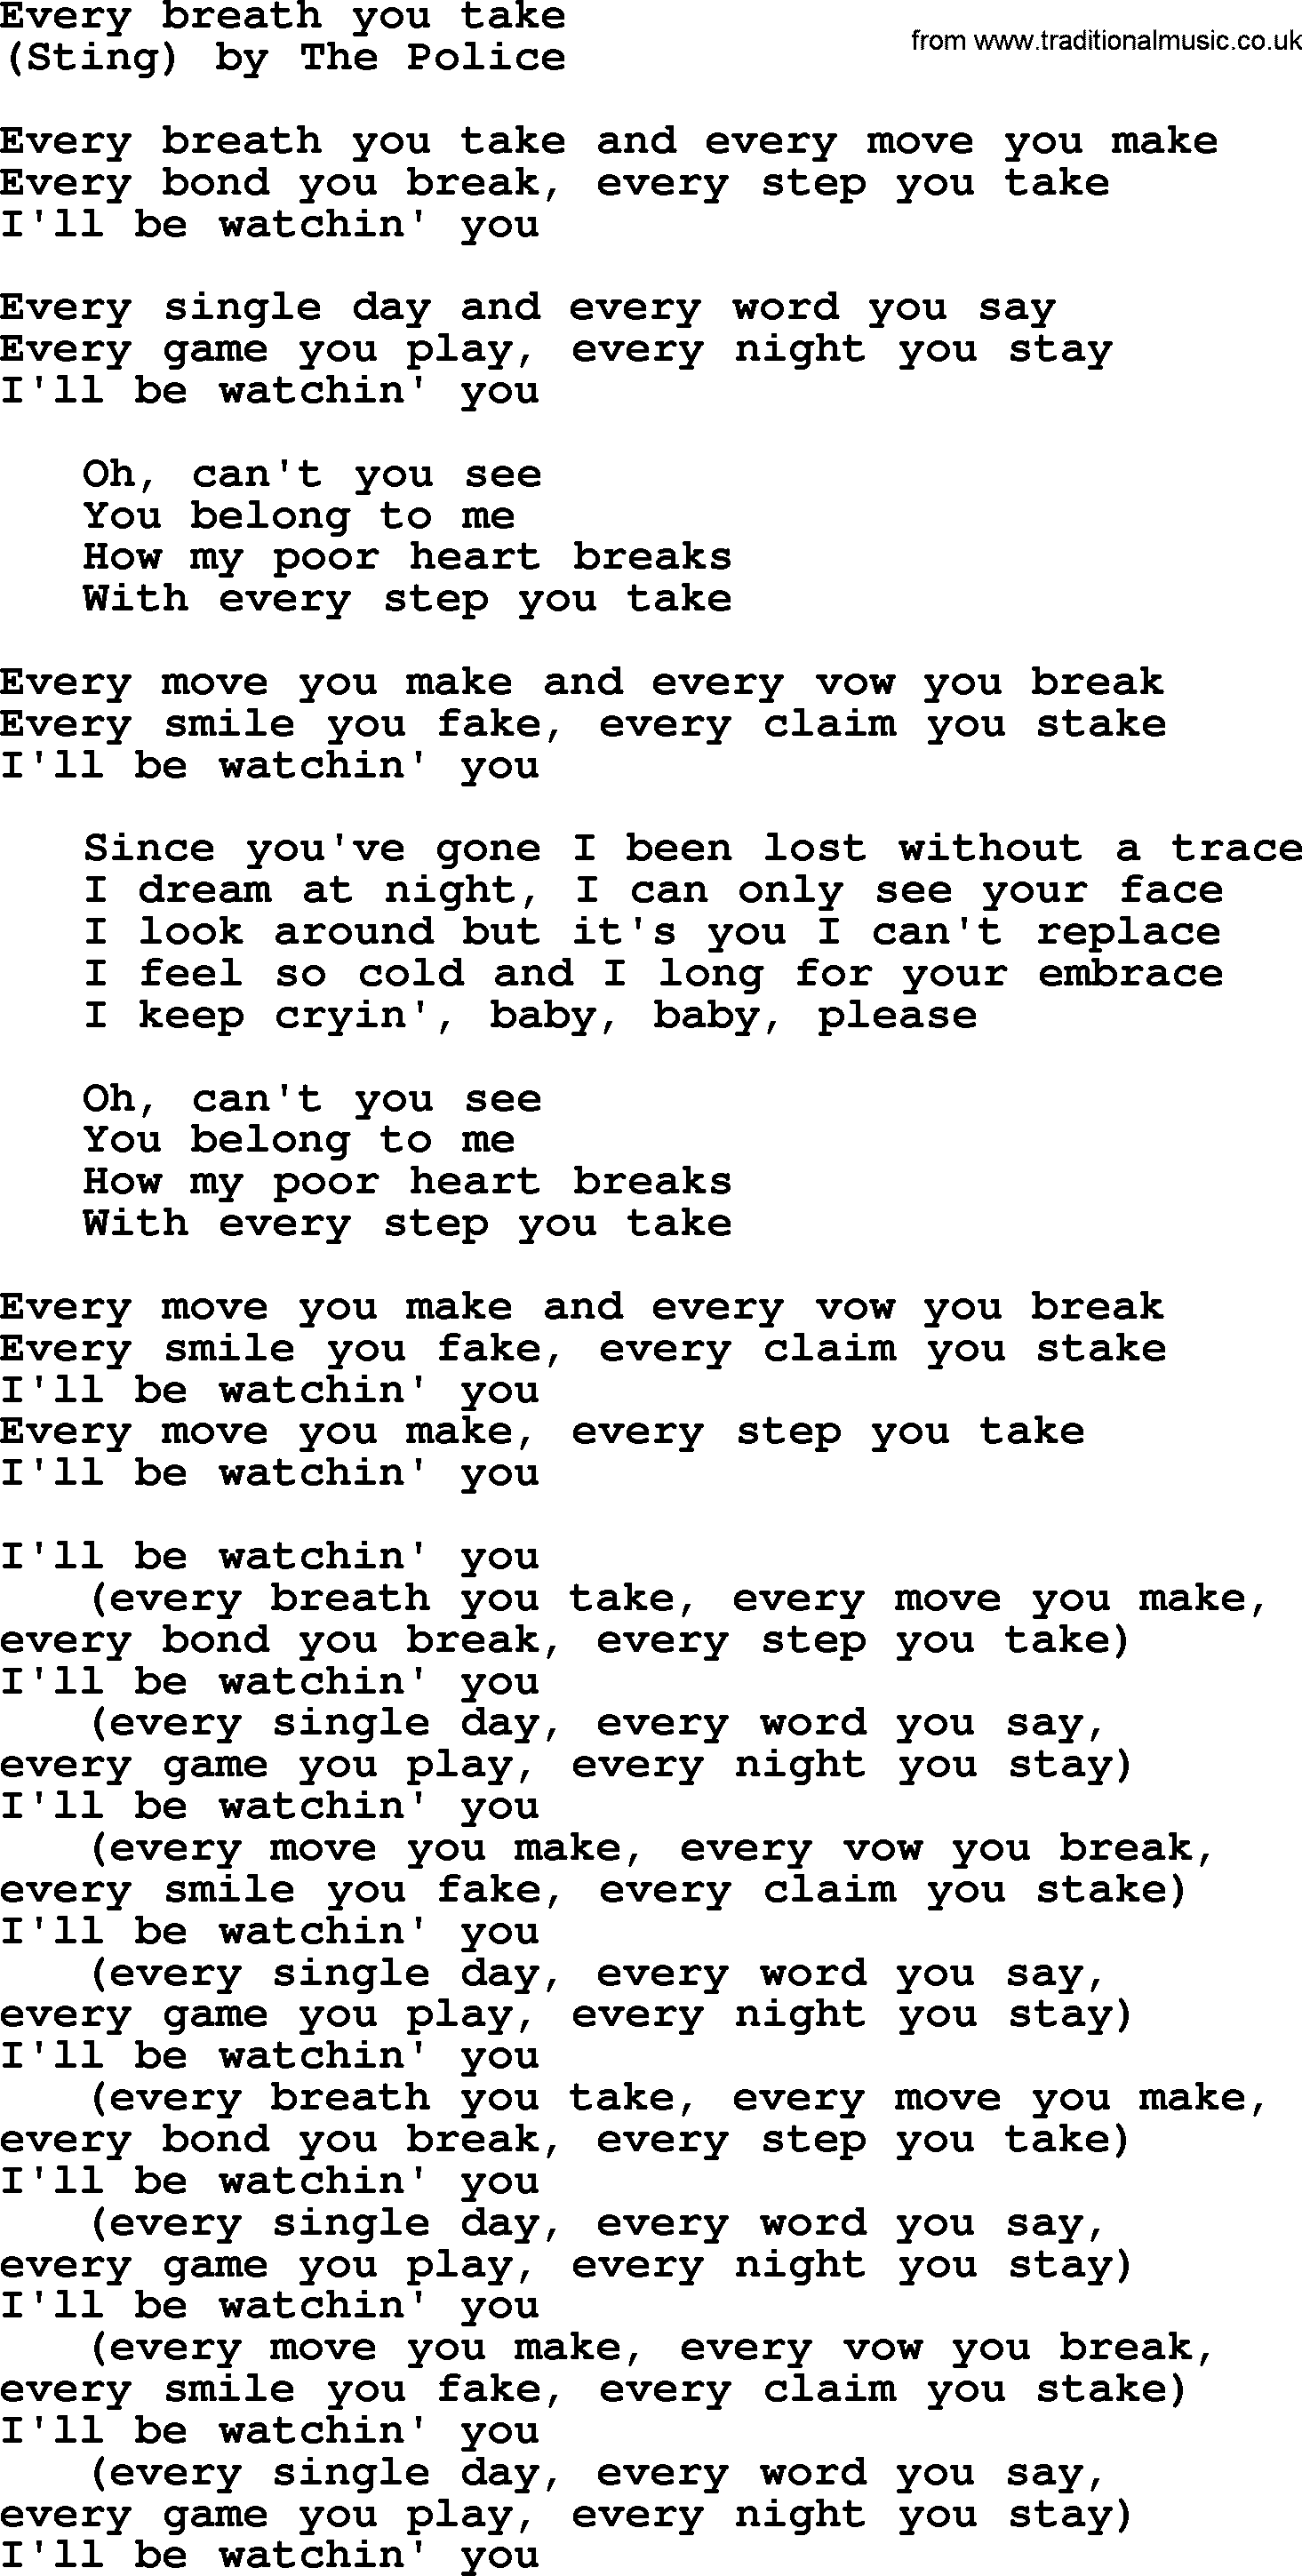 Bruce Springsteen song: Every Breath You Take lyrics